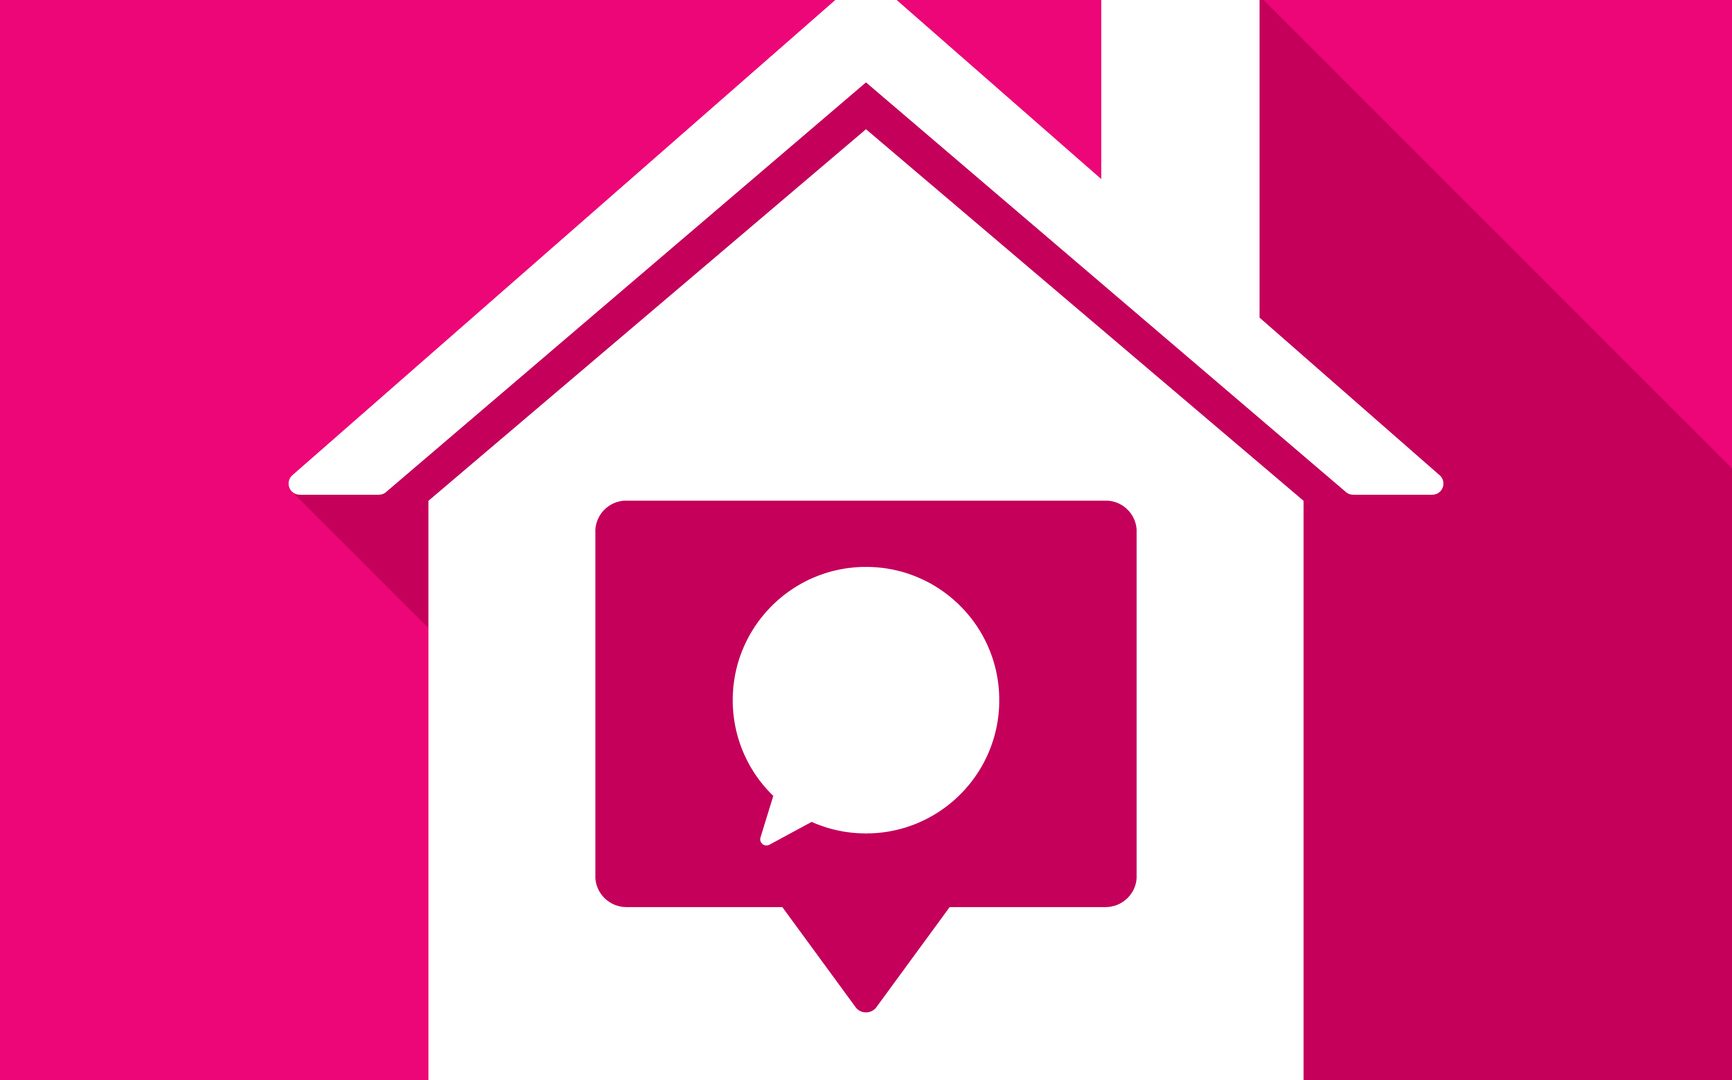 house with heart in speech bubble icon against a pink background